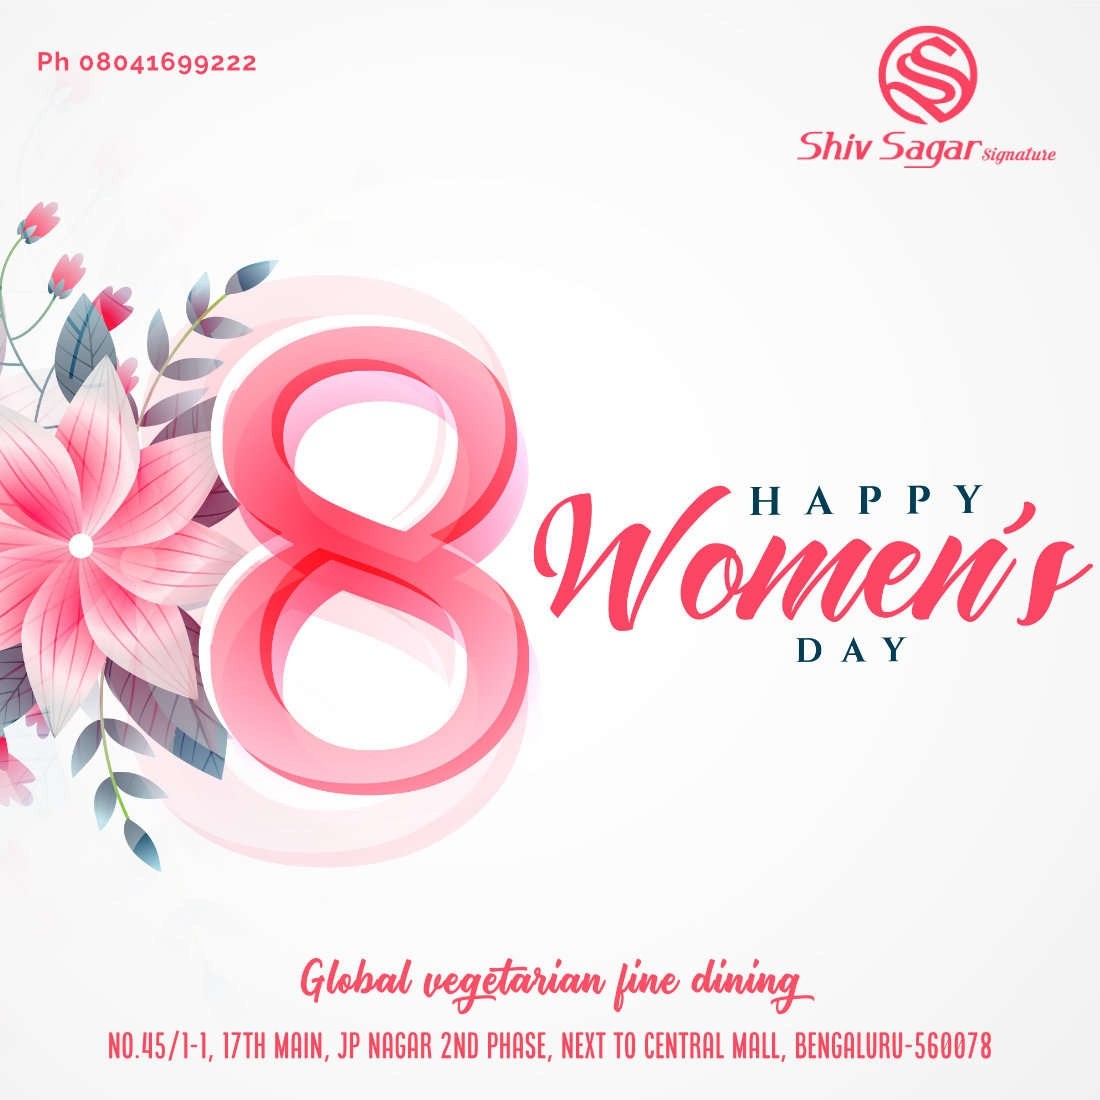 Why Women's Day Social Media Posts Help Businesses Image 5